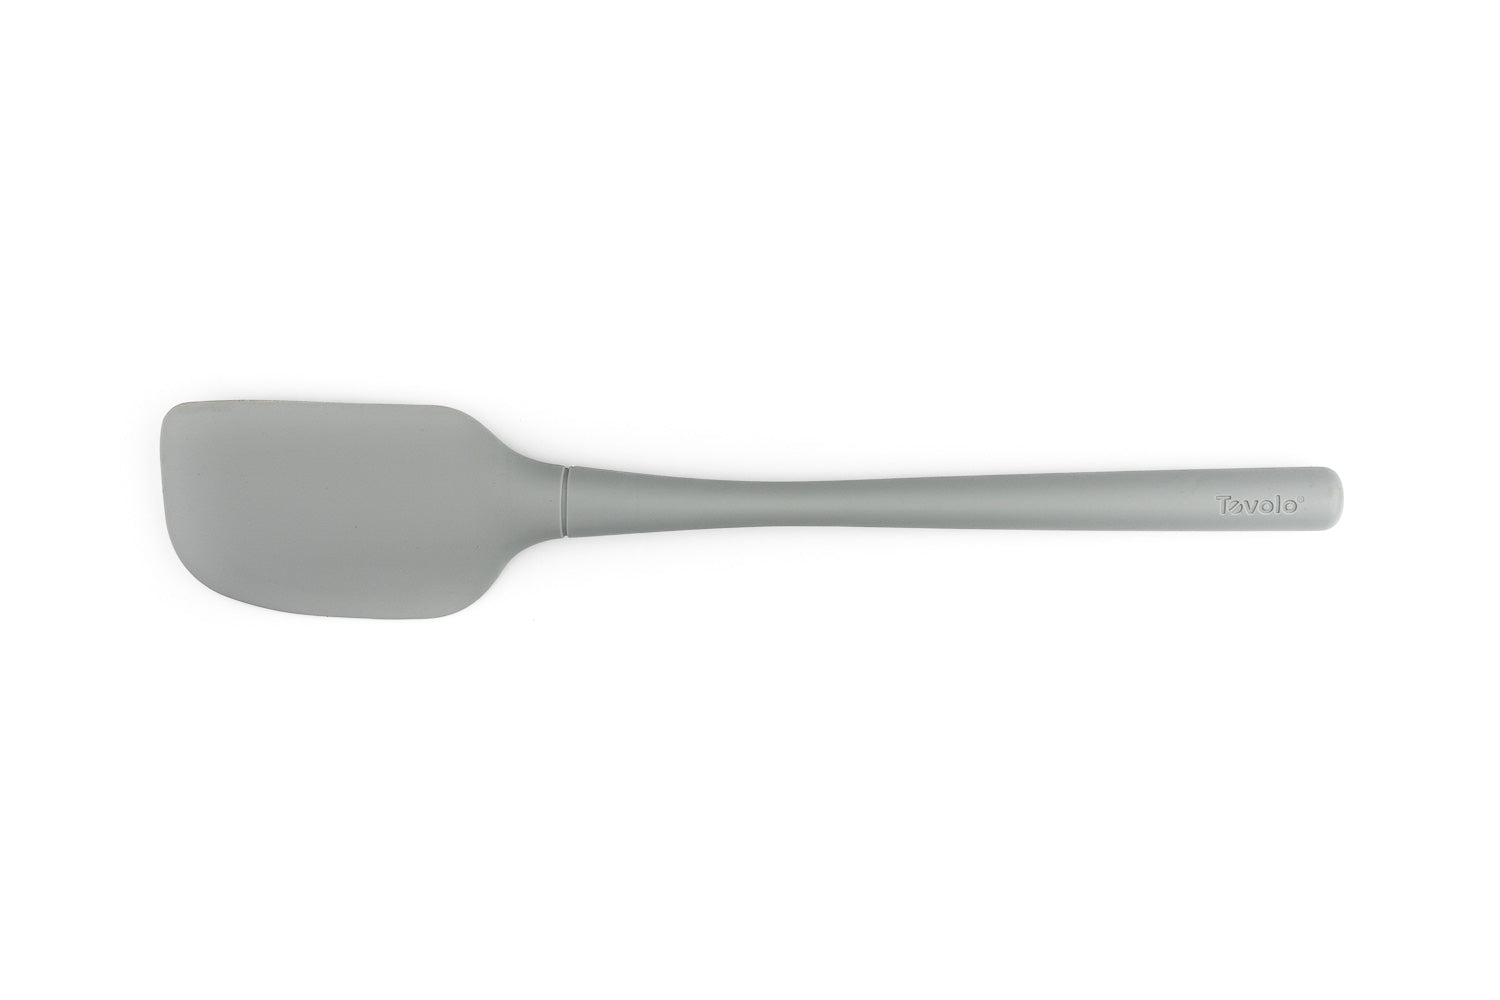 Tovolo Flex-Core Stainless Steel Handled Charcoal Spatula